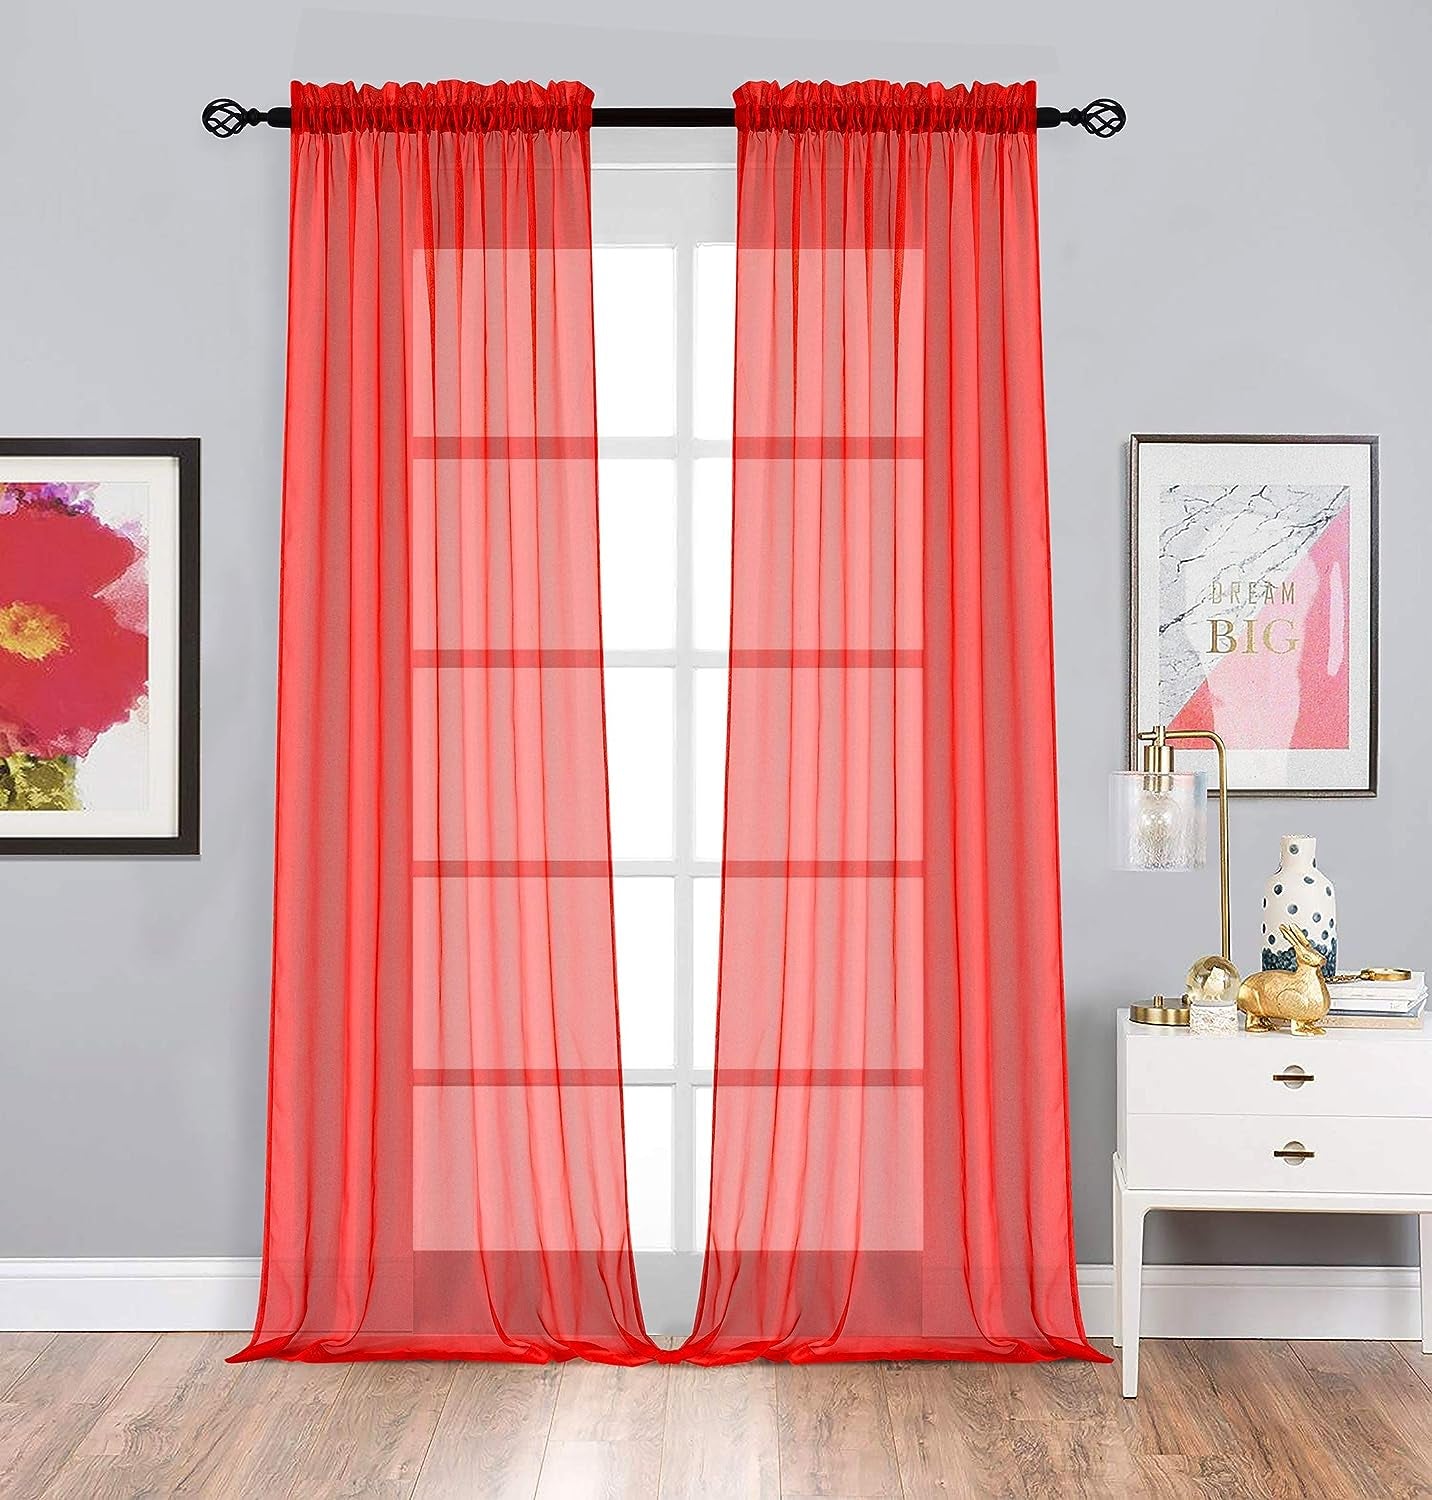 Goodgram 2 Pack: Basic Rod Pocket Sheer Voile Window Curtain Panels - Assorted Colors (White, 84 In. Long)  Goodgram Red Contemporary 95 In. Long